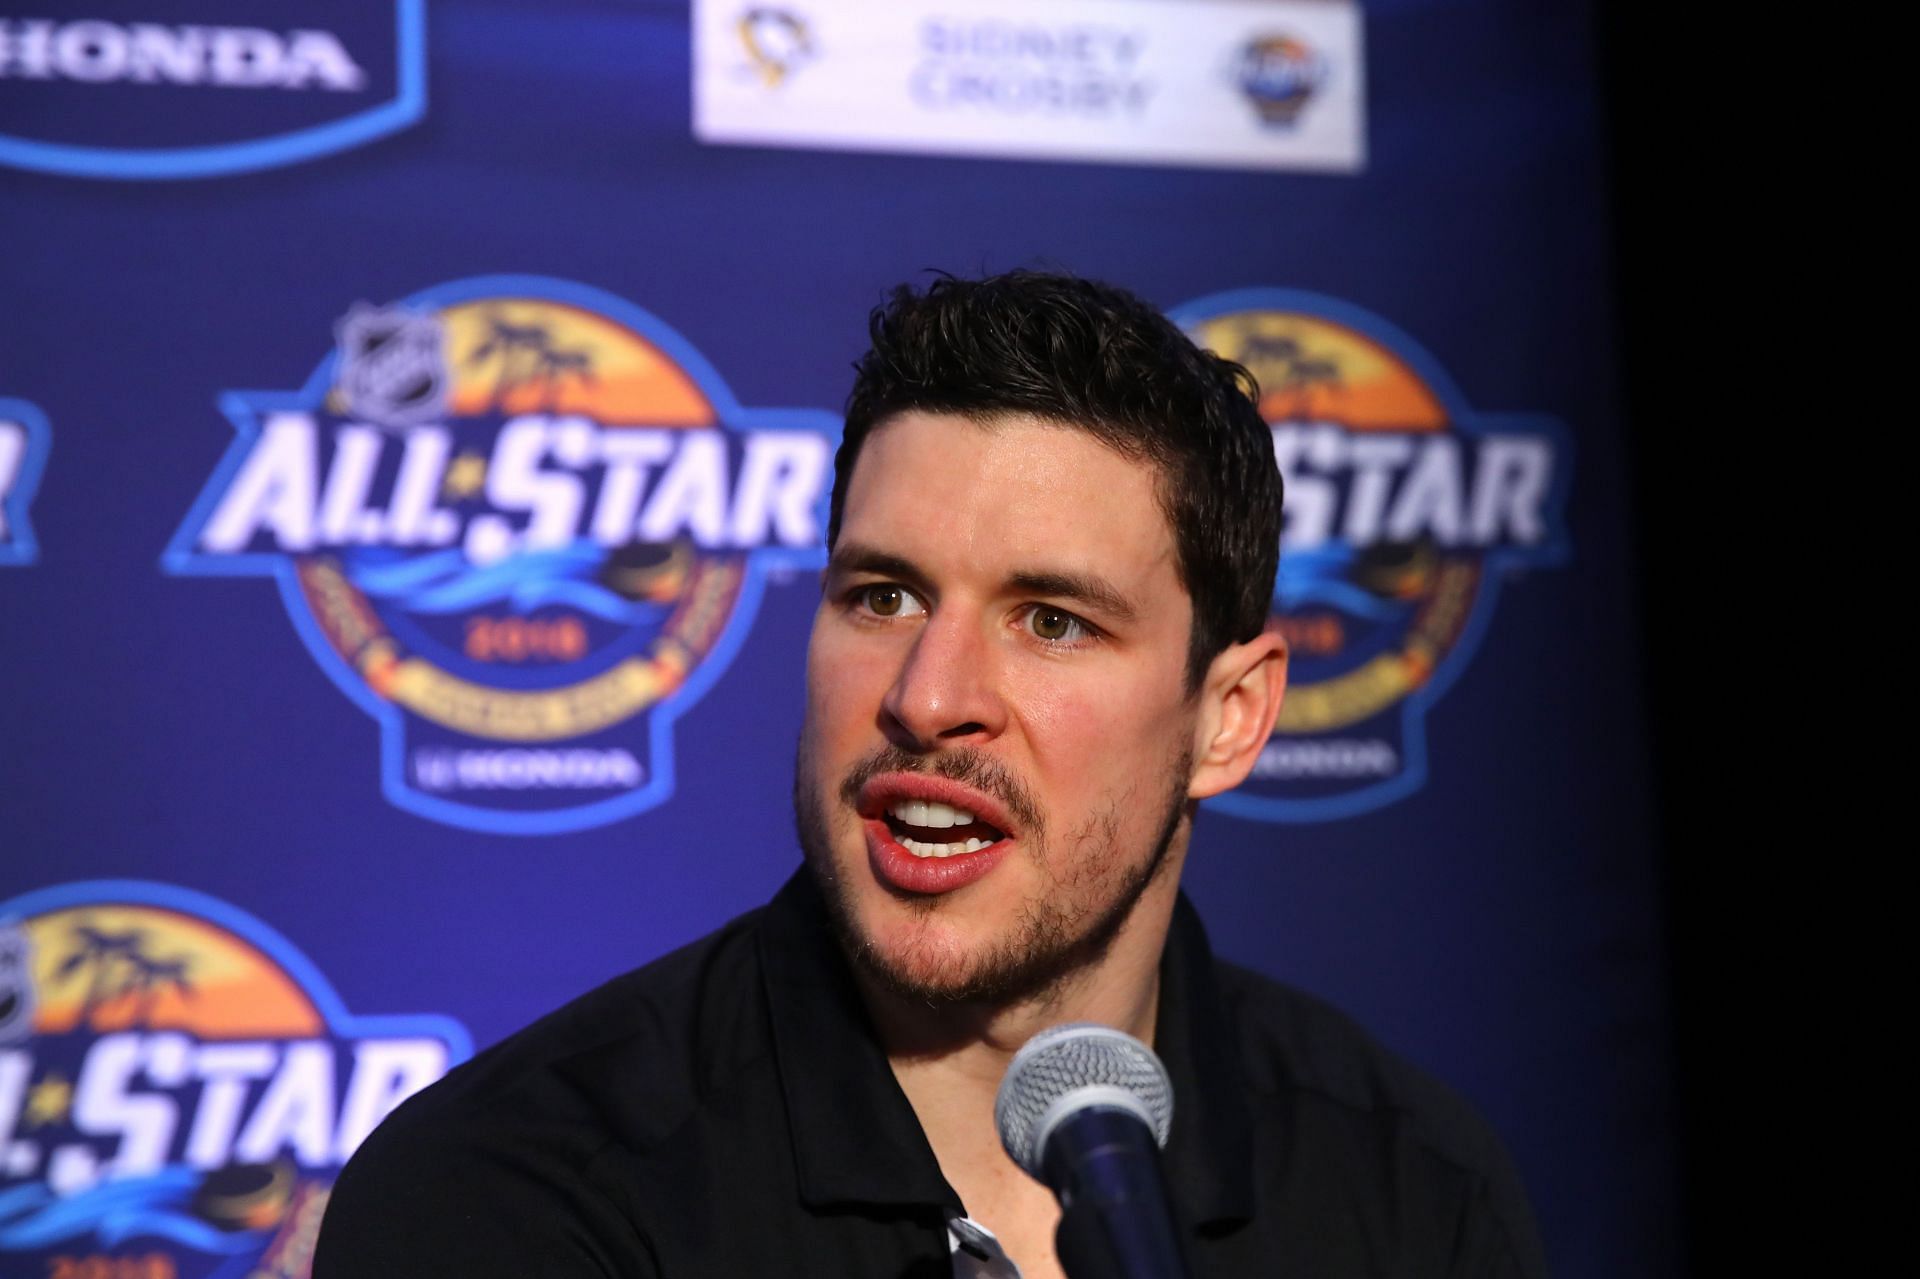 Sidney Crosby at the 2018 All-Star Game